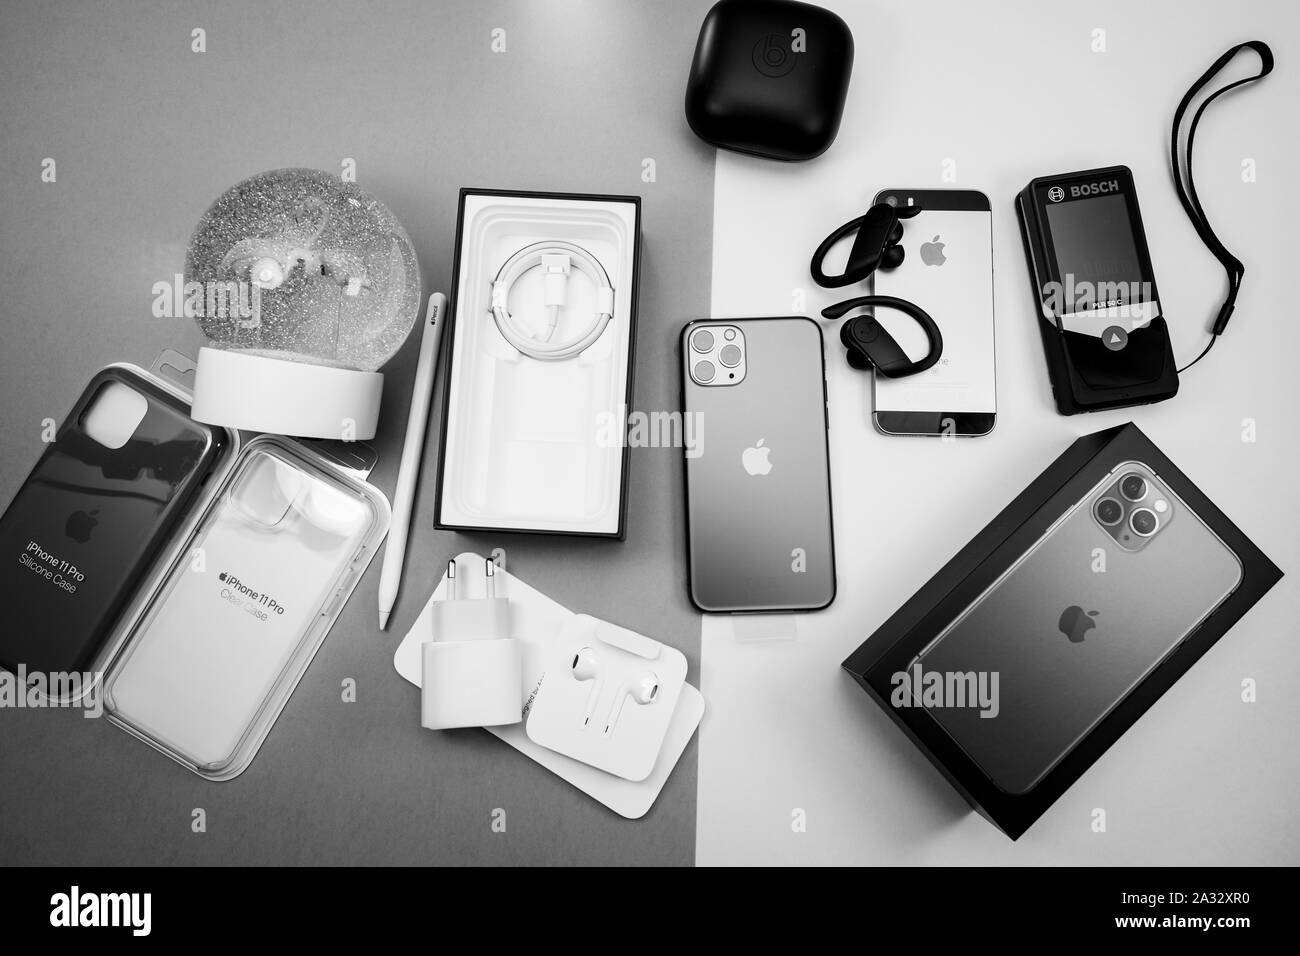 Paris, France - Sep 20, 2019: Unboxing of the lastest iPhone smartphone with triple-camera lenses latest iPhone 11 Pro by Apple Computers next to Beats by Dr Dre headphones black and white image Stock Photo